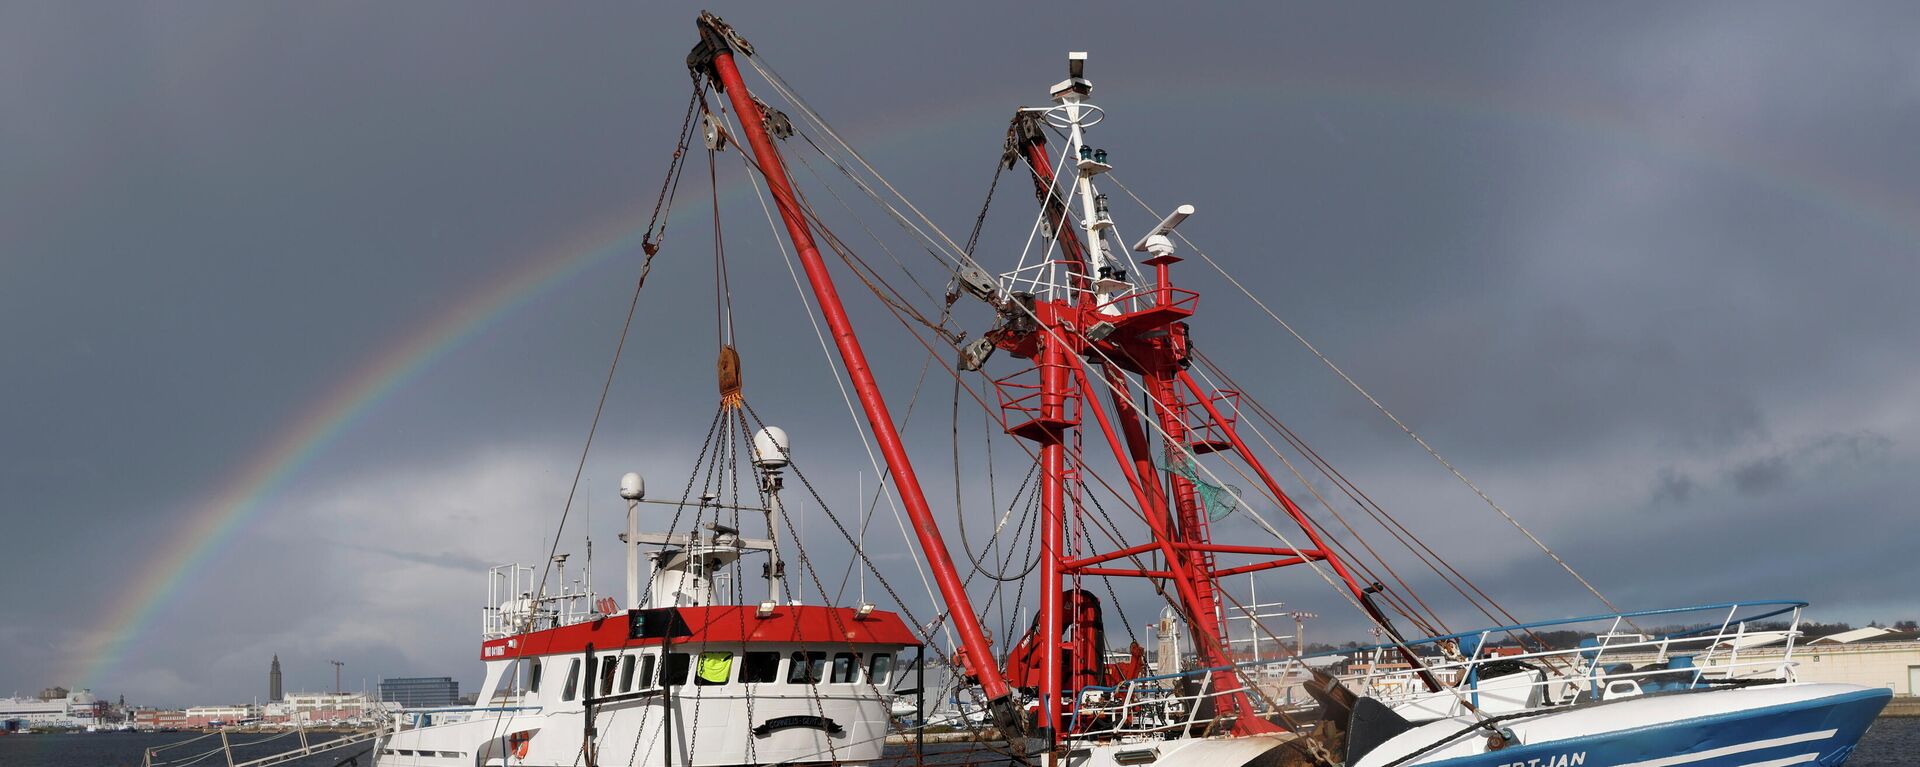 A rainbow appears as British trawler Cornelis Gert Jan is seen moored in the port of Le Havre, after being seized last week?fishing?in the French territorial waters without licence, in Le Havre, France, November 2, 2021 - Sputnik International, 1920, 20.11.2021